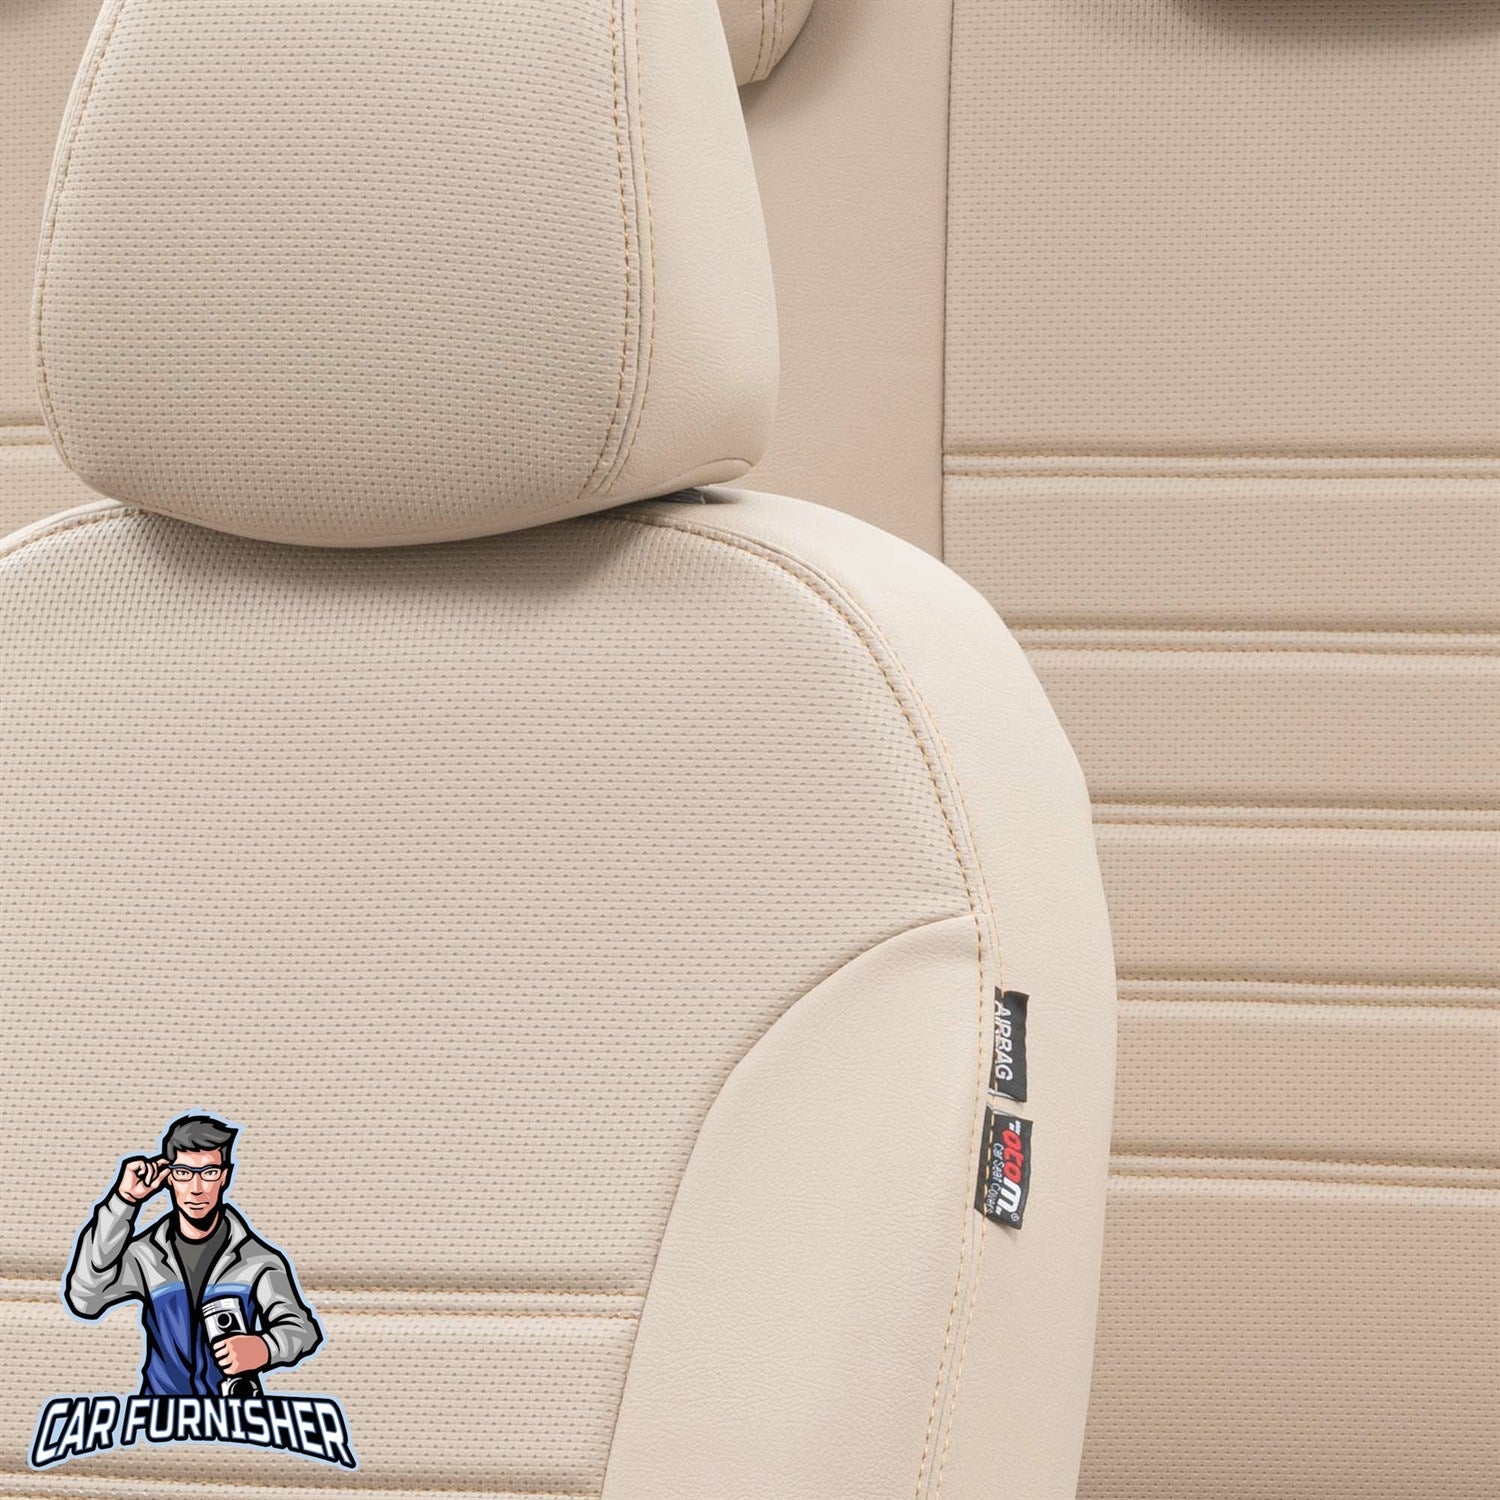 Volvo S60 Car Seat Cover 2000-2018 T4/T5/T6/T8/D5 New York Design Beige Full Set (5 Seats + Handrest) Leather & Fabric